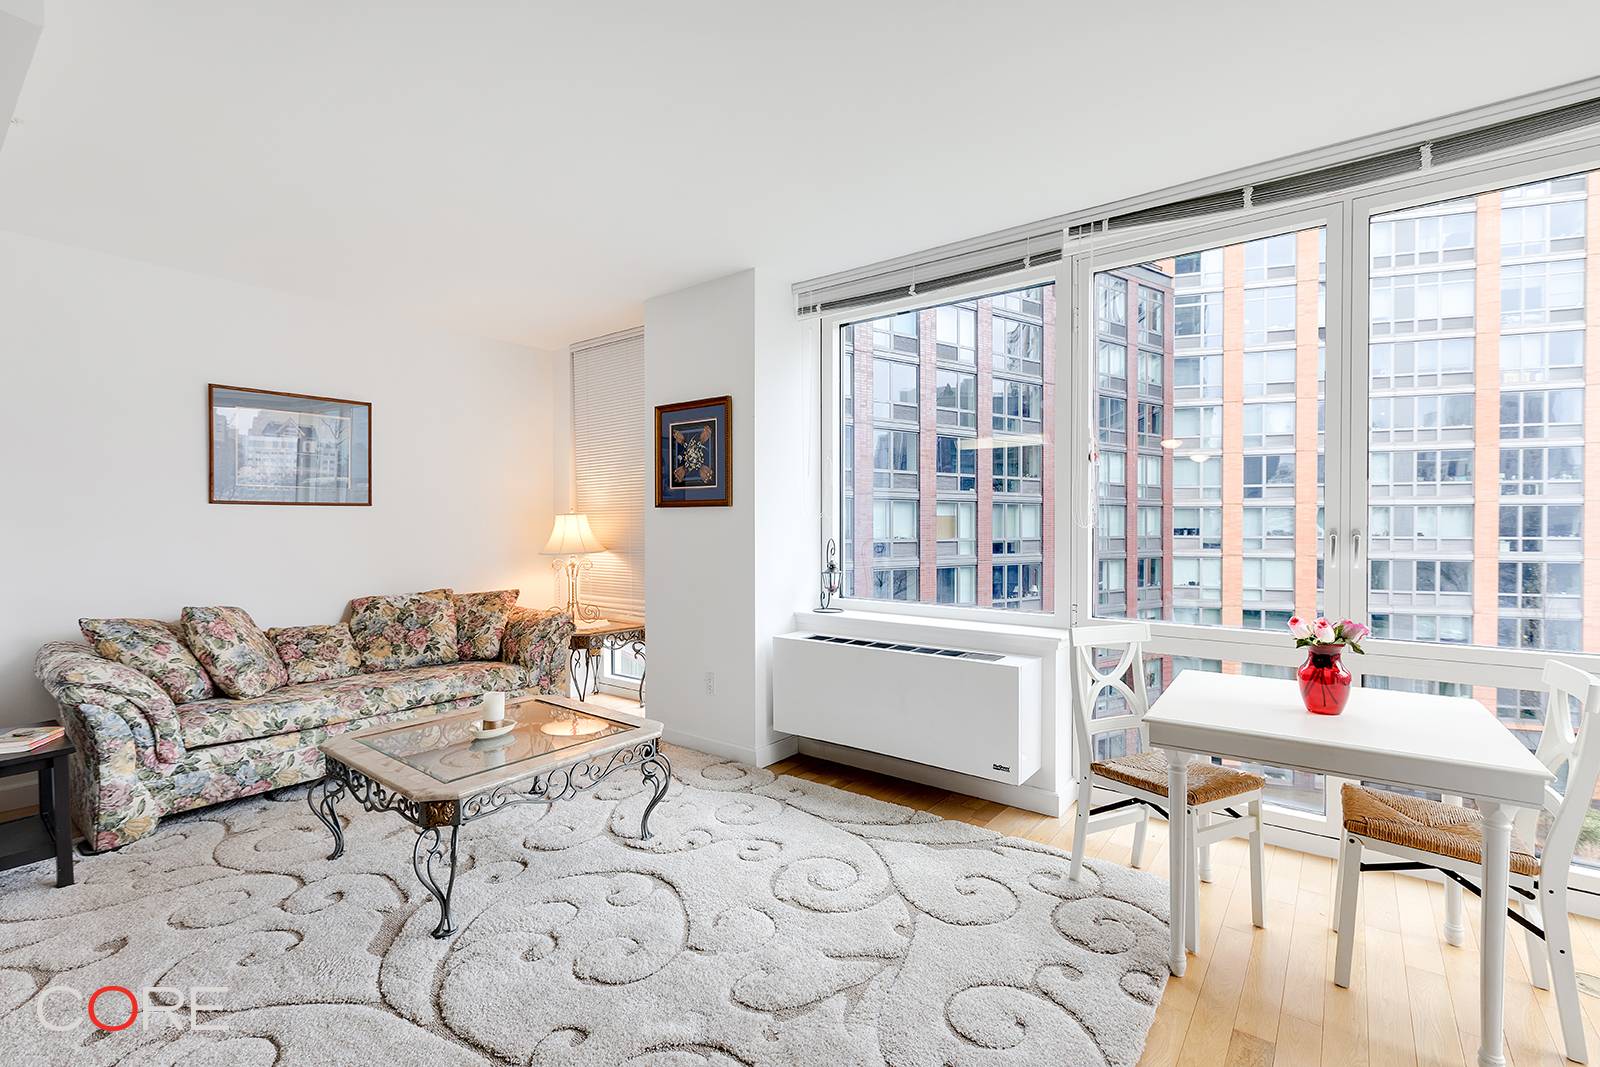 Owner offering 1 month free rent on a 13 month lease Live in the best full service condo building on Roosevelt Island.